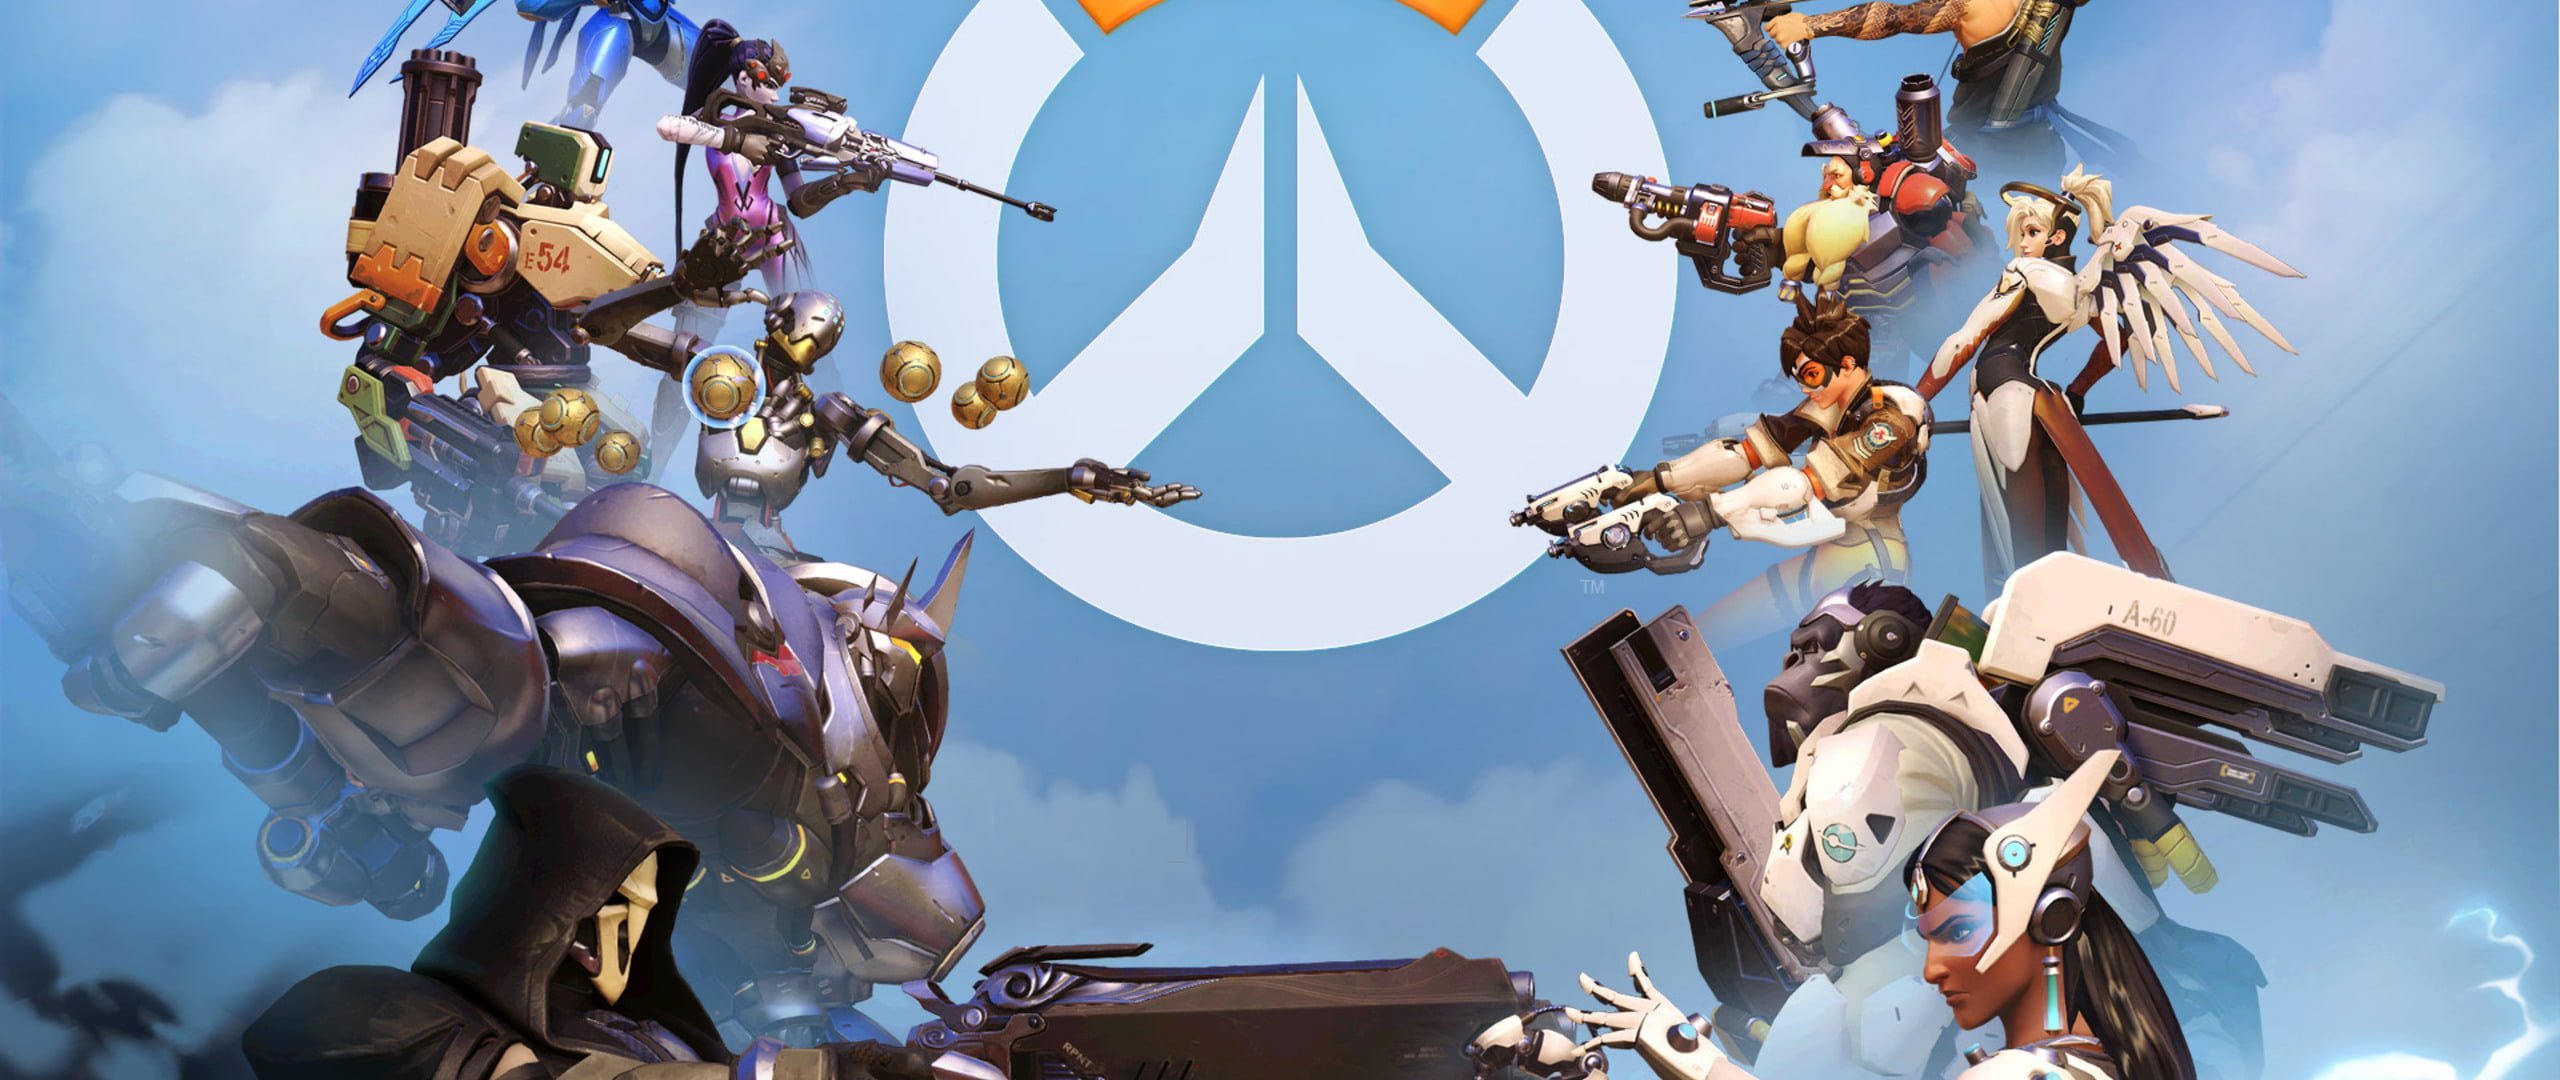 Overwatch Will Be Free to Play September 22-25